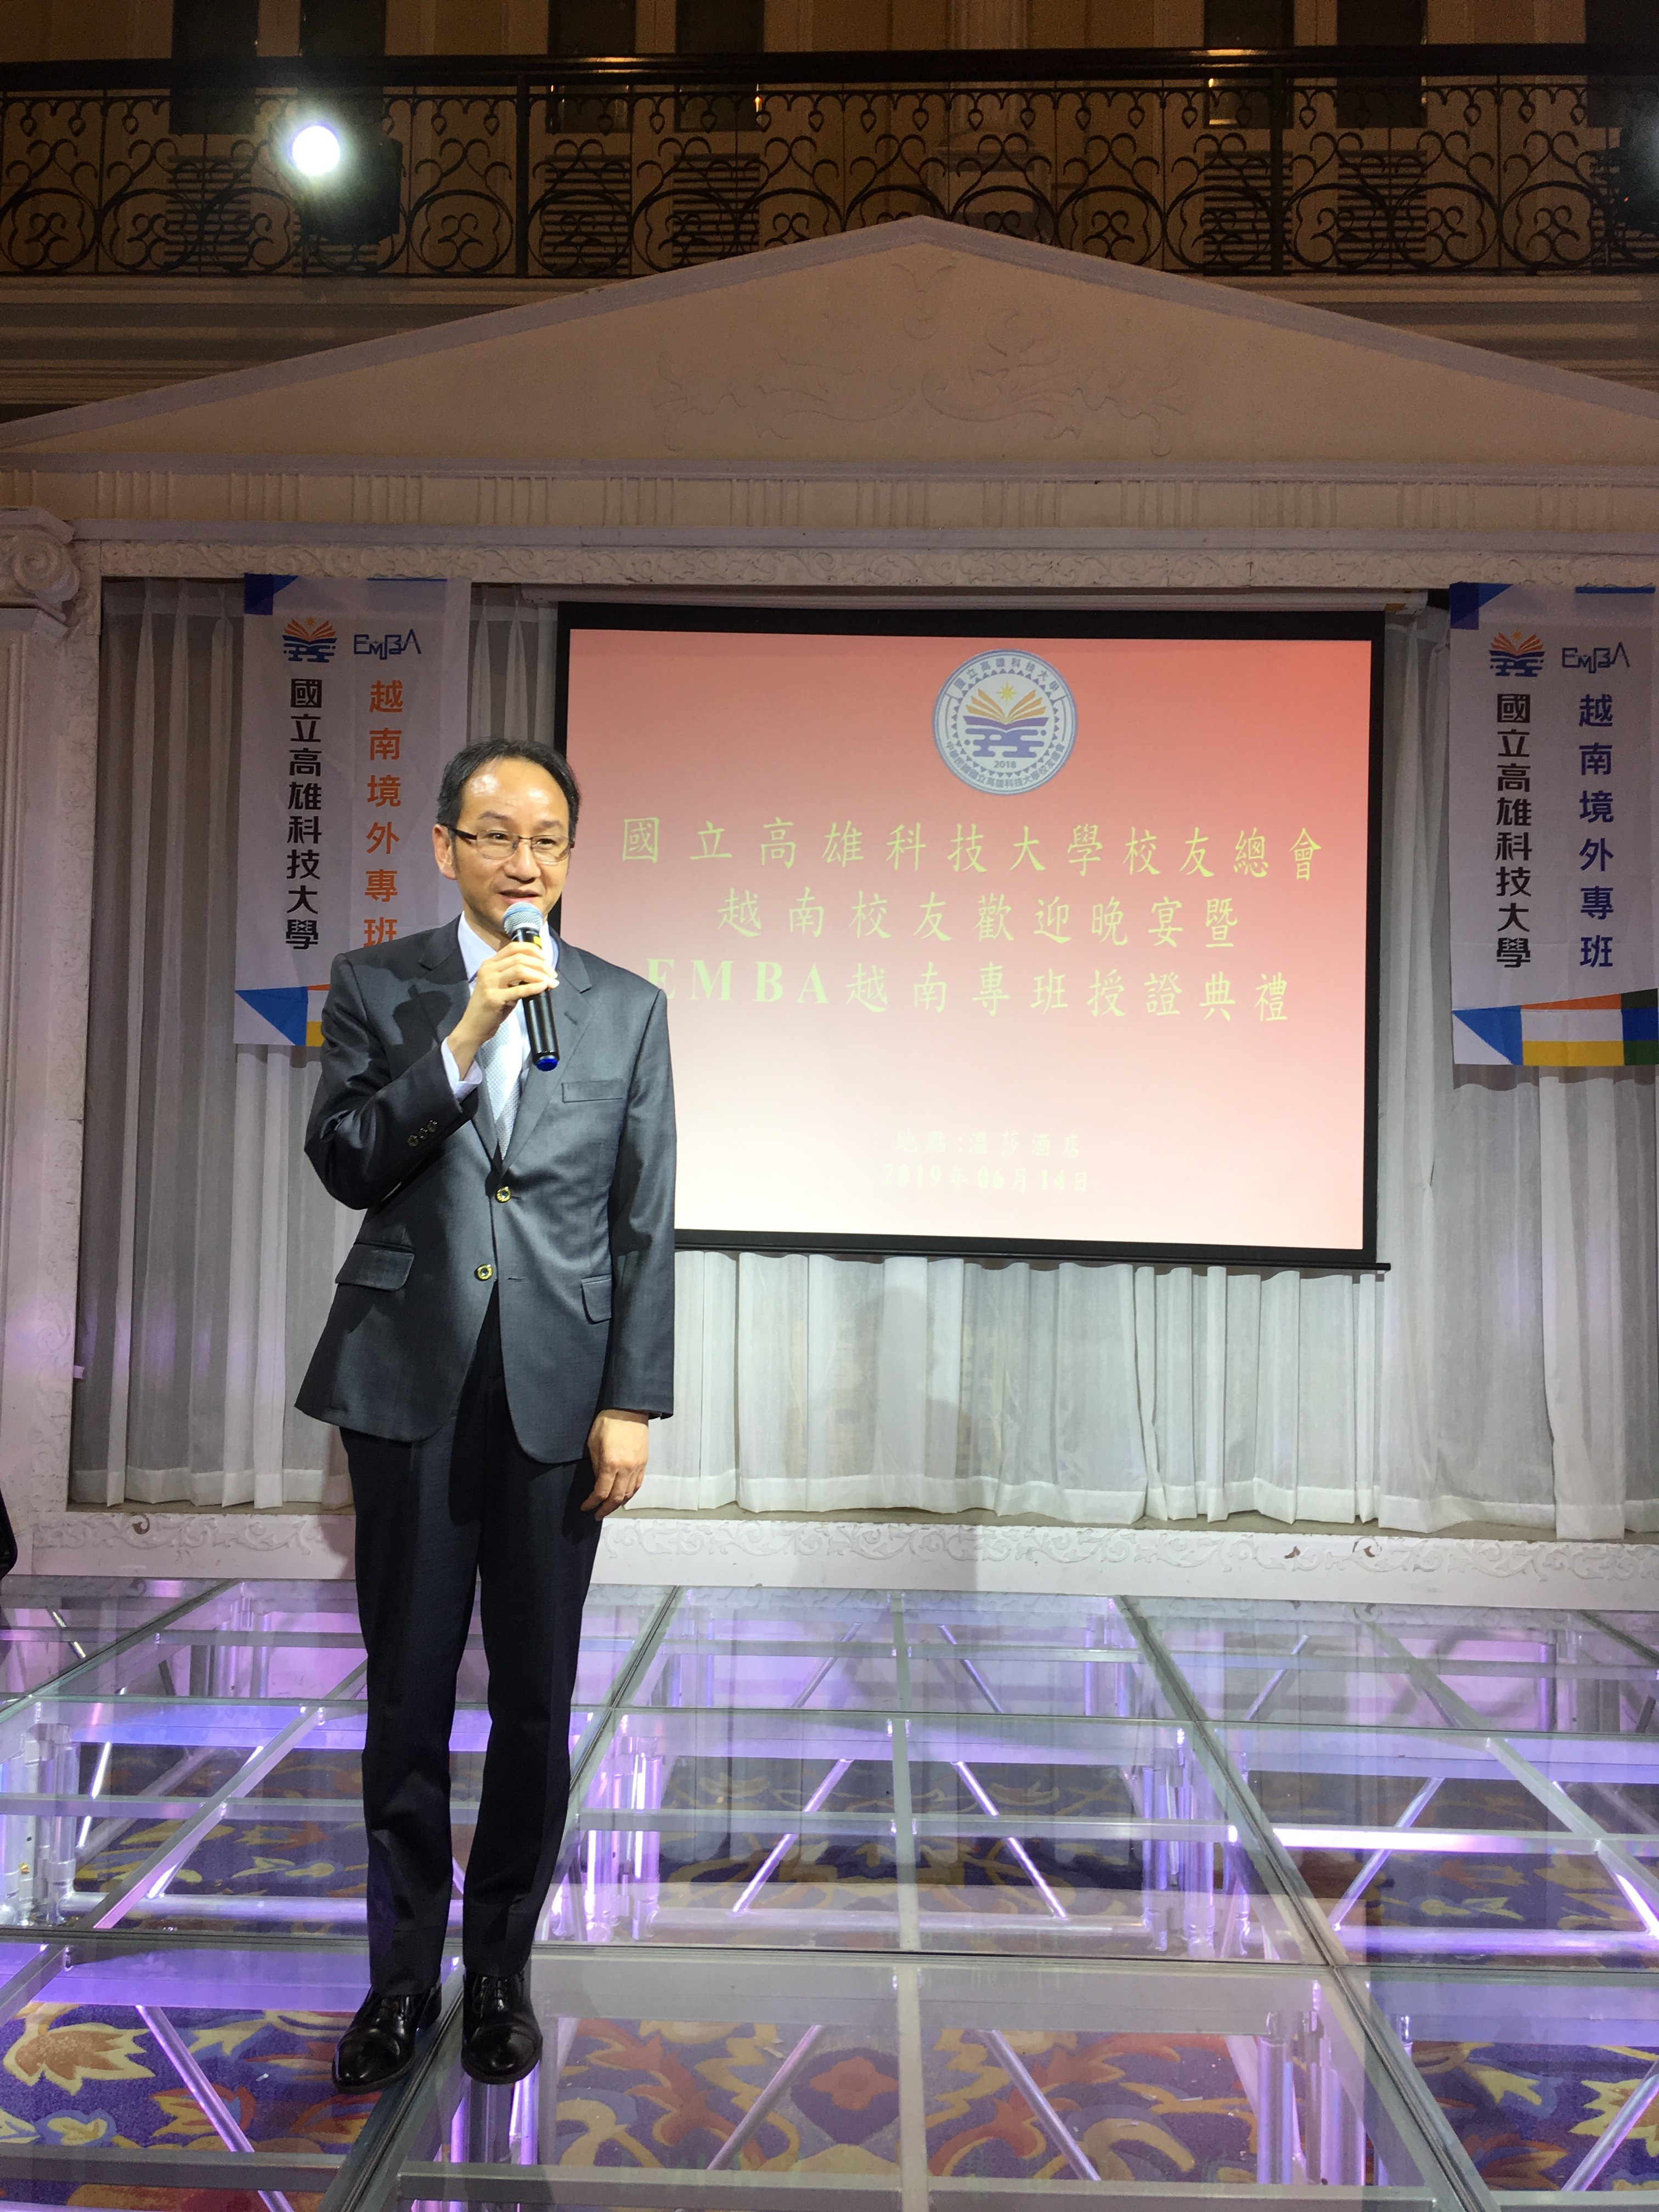 Chung Wen-Cheng, Director General of the Taipei Economic and Cultural Office in Ho Chi Minh City spoke at the opening.